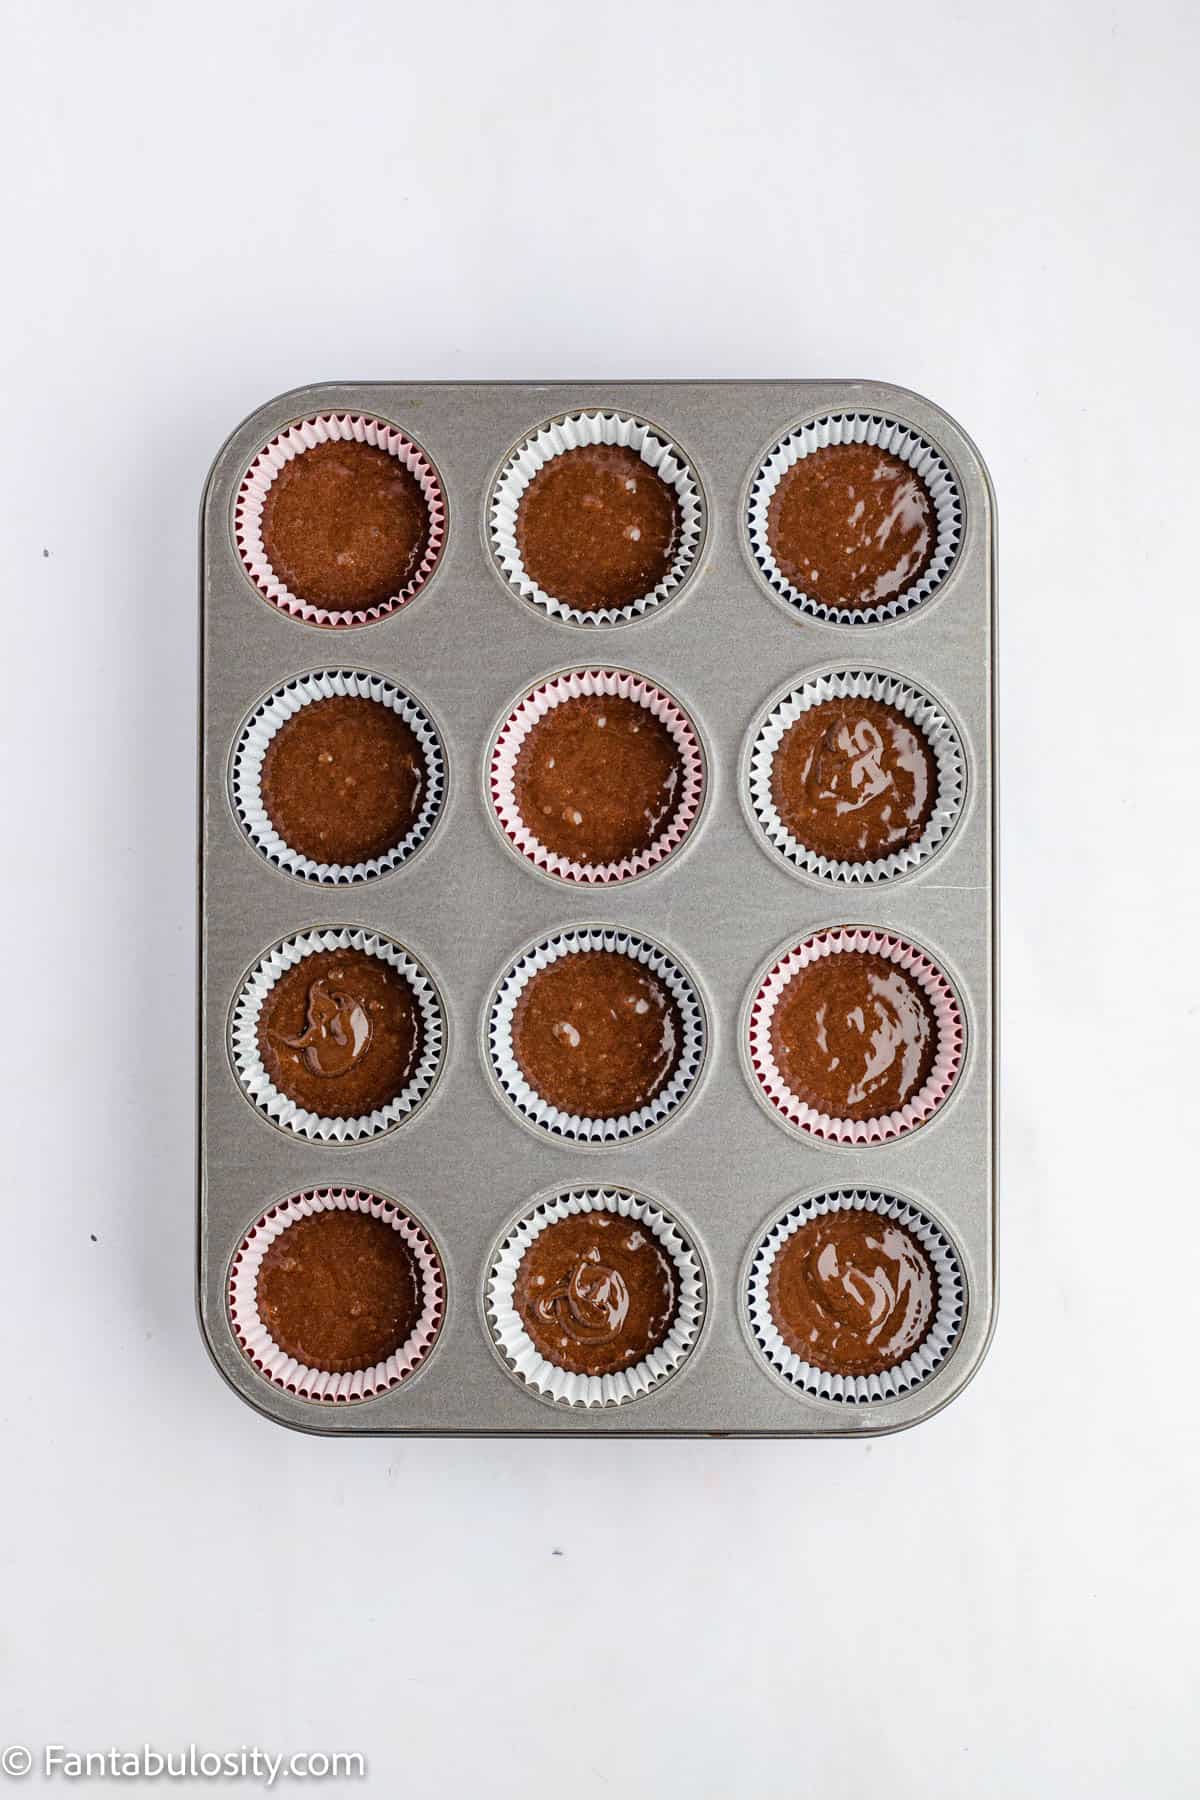 A 12 cup muffin tin is filled with chocolate cupcake batter ready to be baked